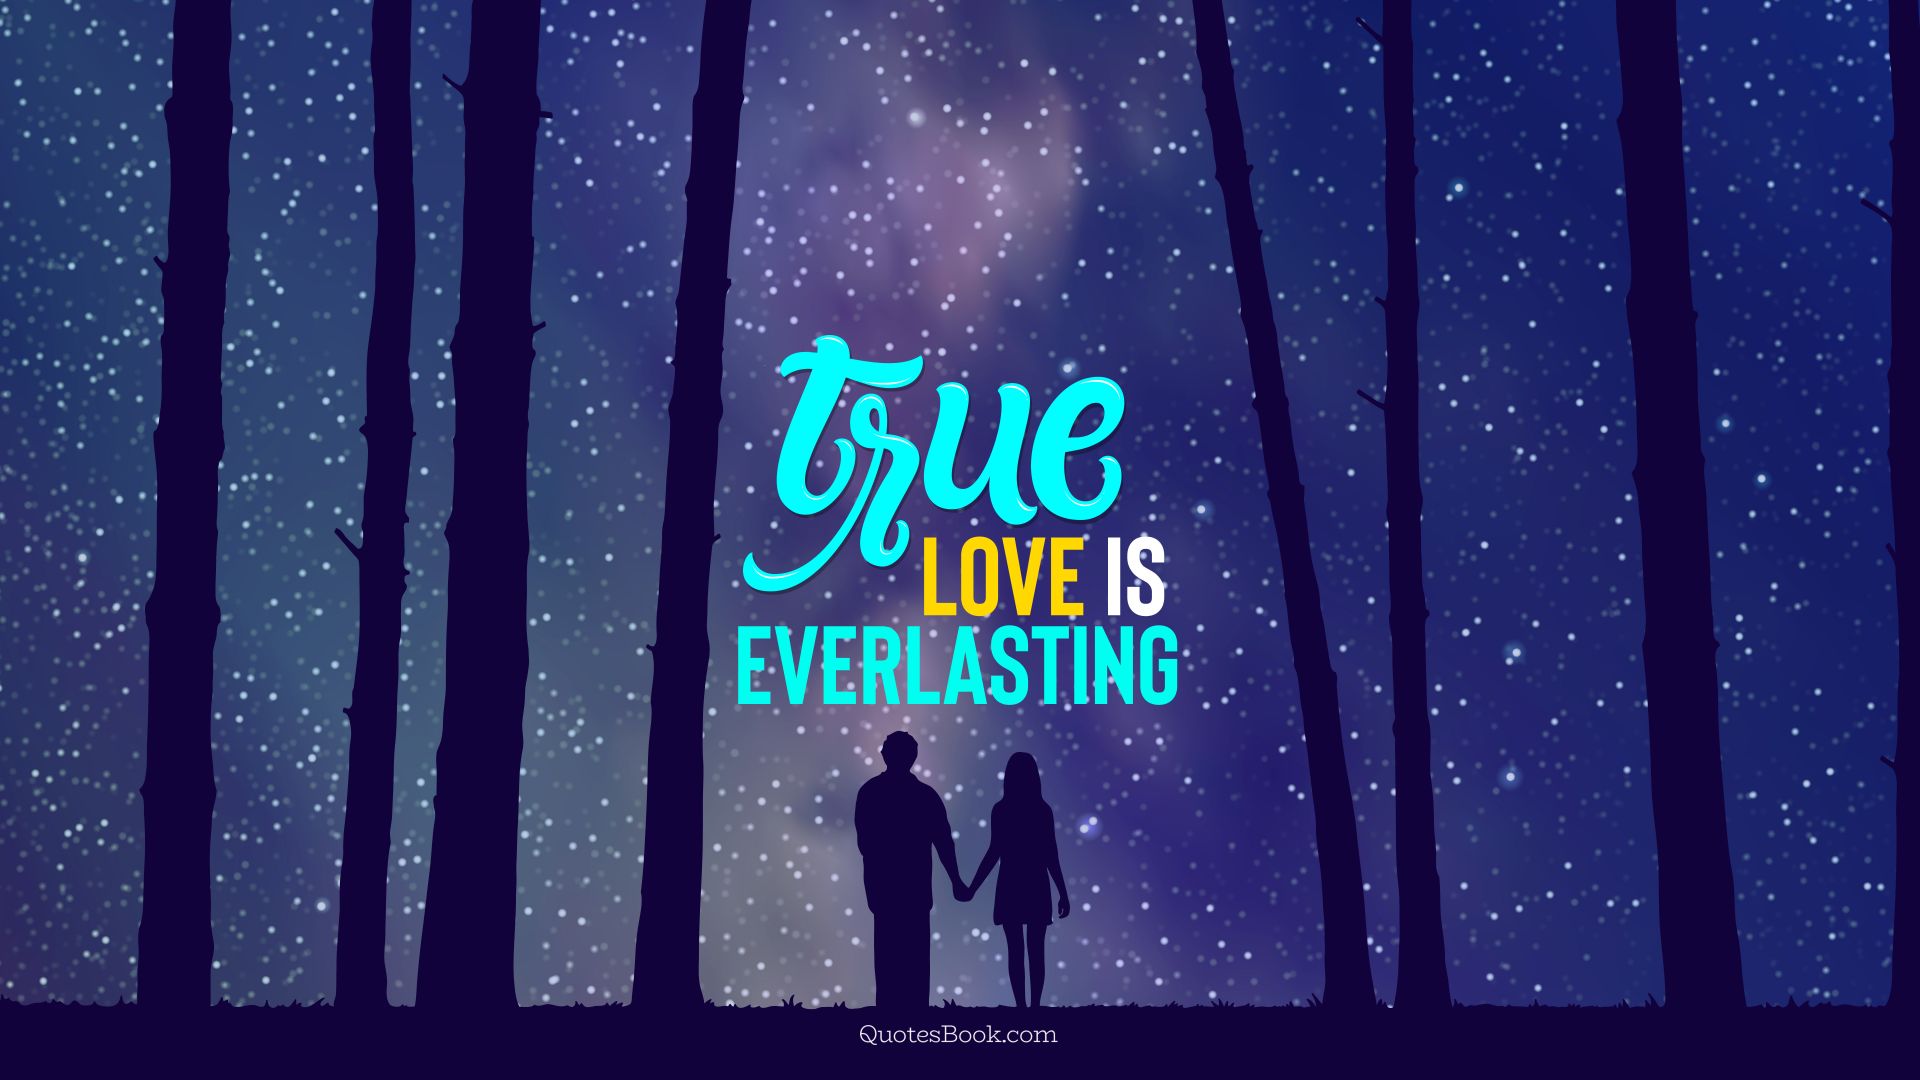 True love is everlasting. - Quote by QuotesBook